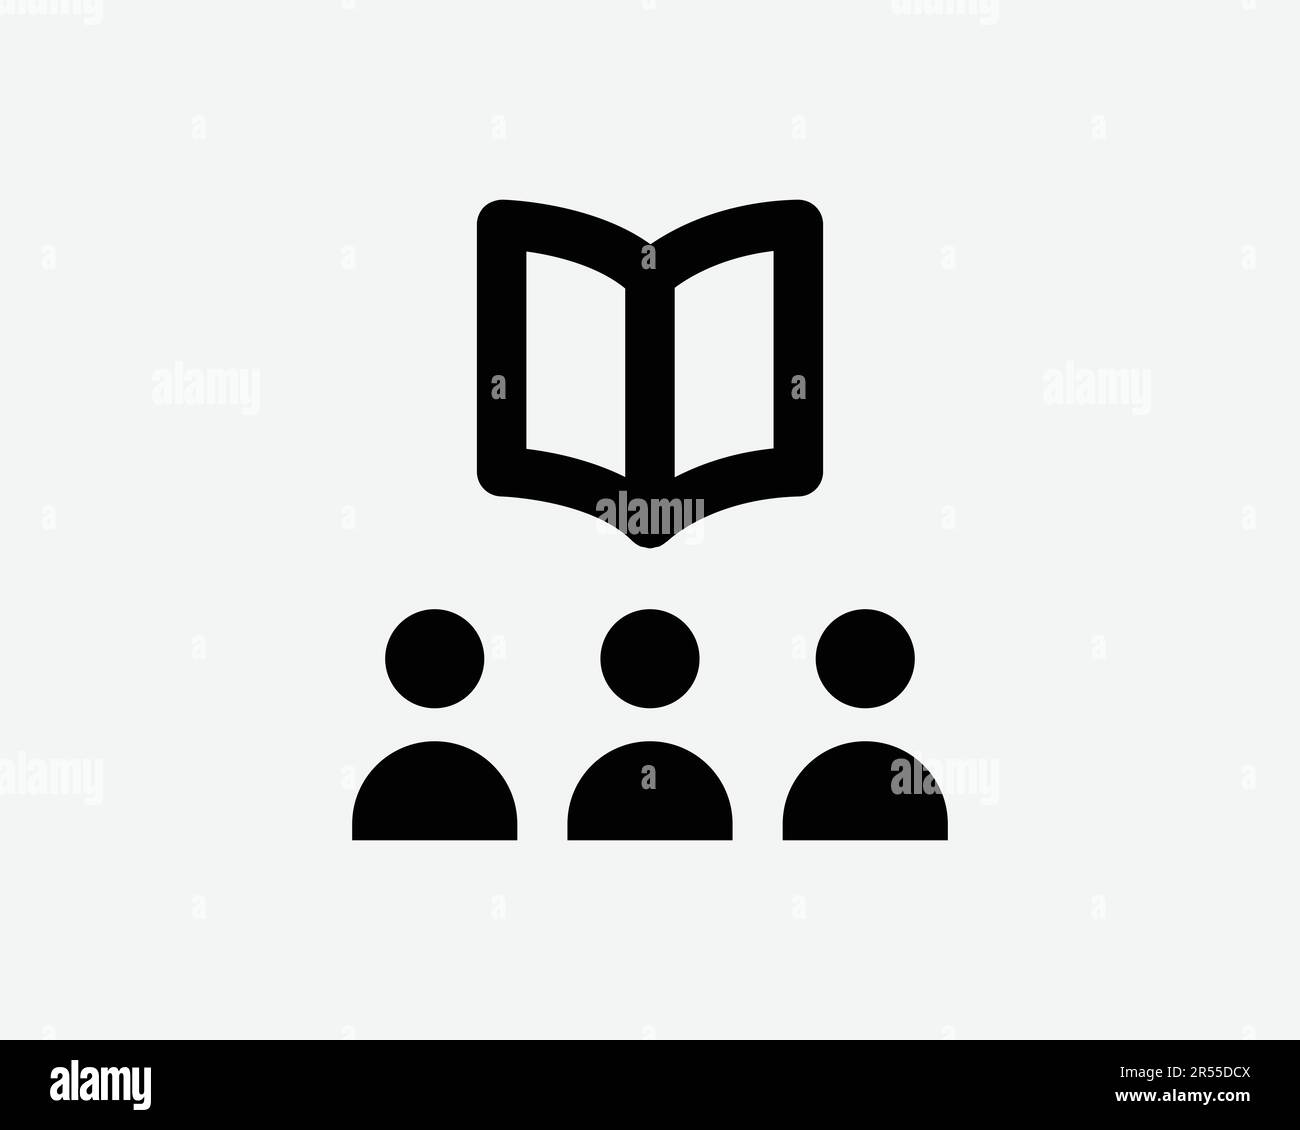 Library Icon Student Book School Class Classroom Group Learning Study College Course Sign Symbol Black Artwork Graphic Illustration Clipart EPS Vector Stock Vector